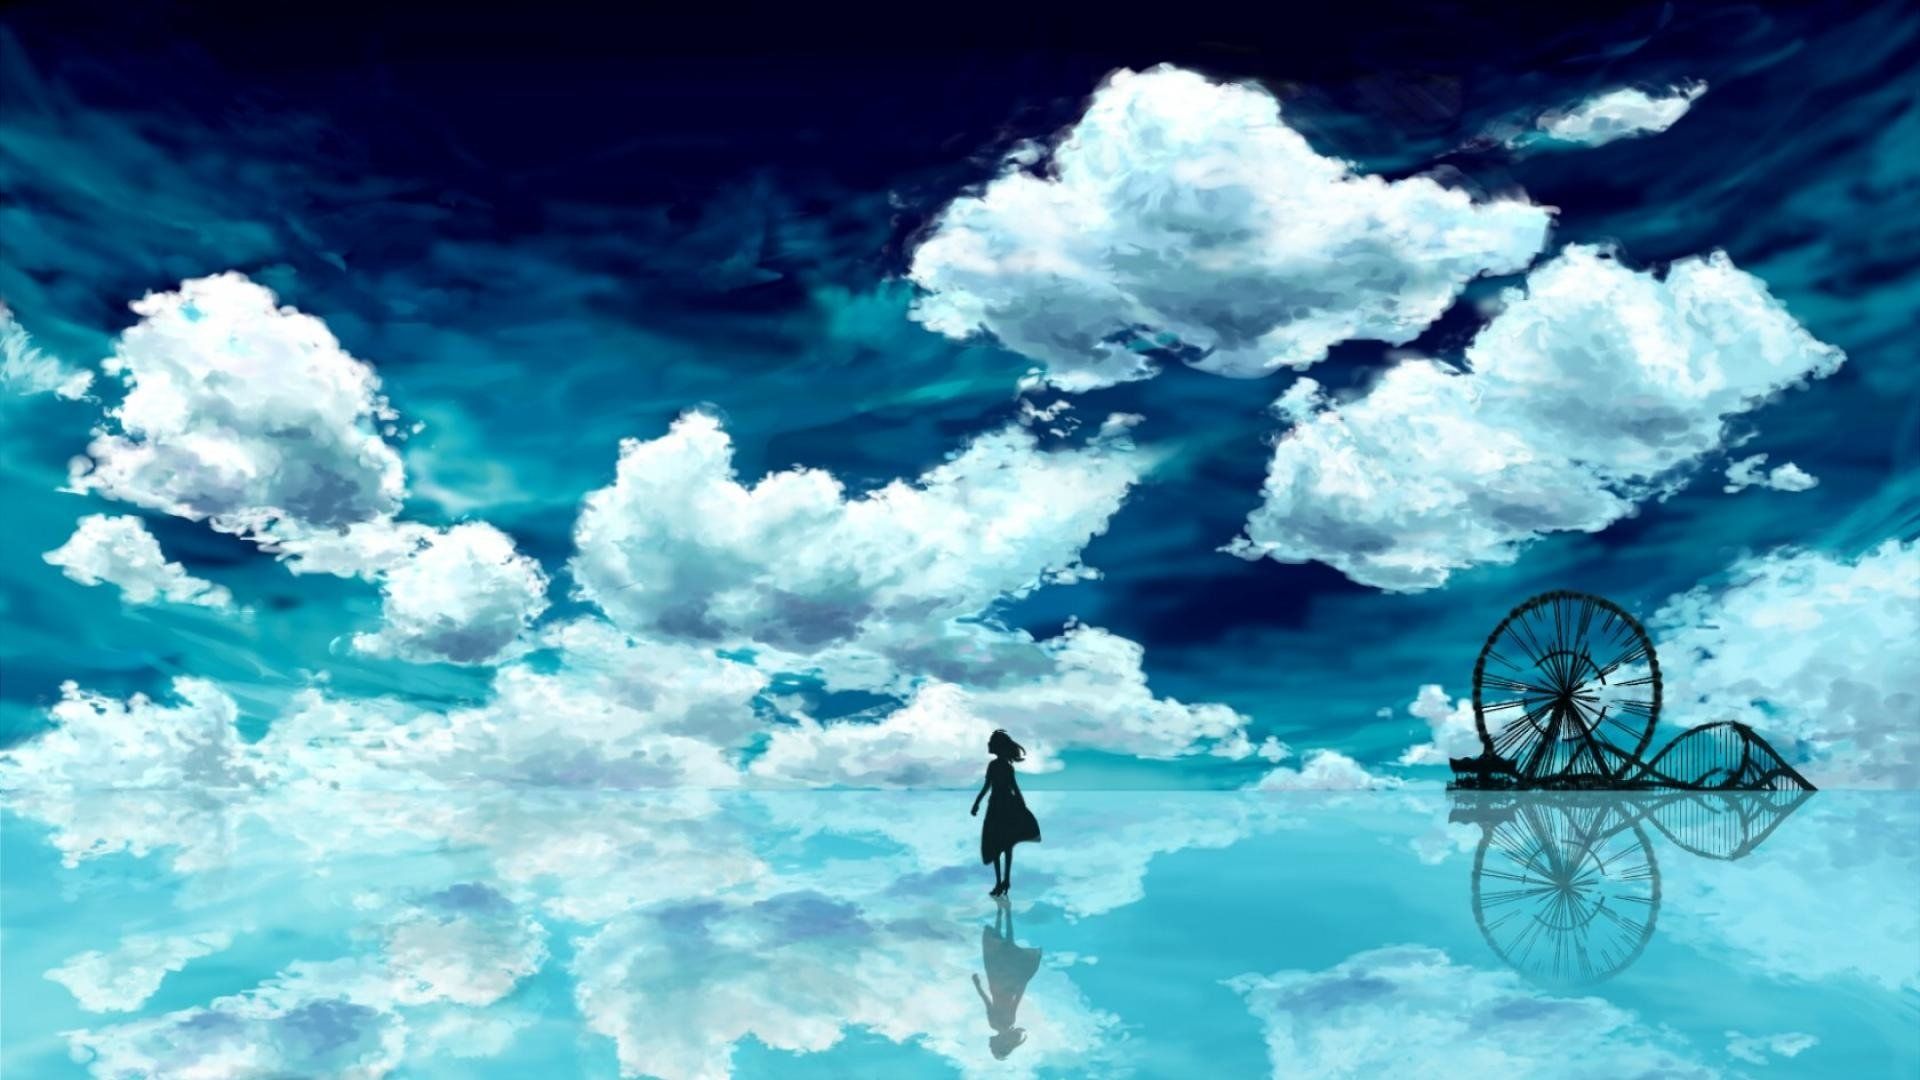 Anime Wallpaper With Blue Sky